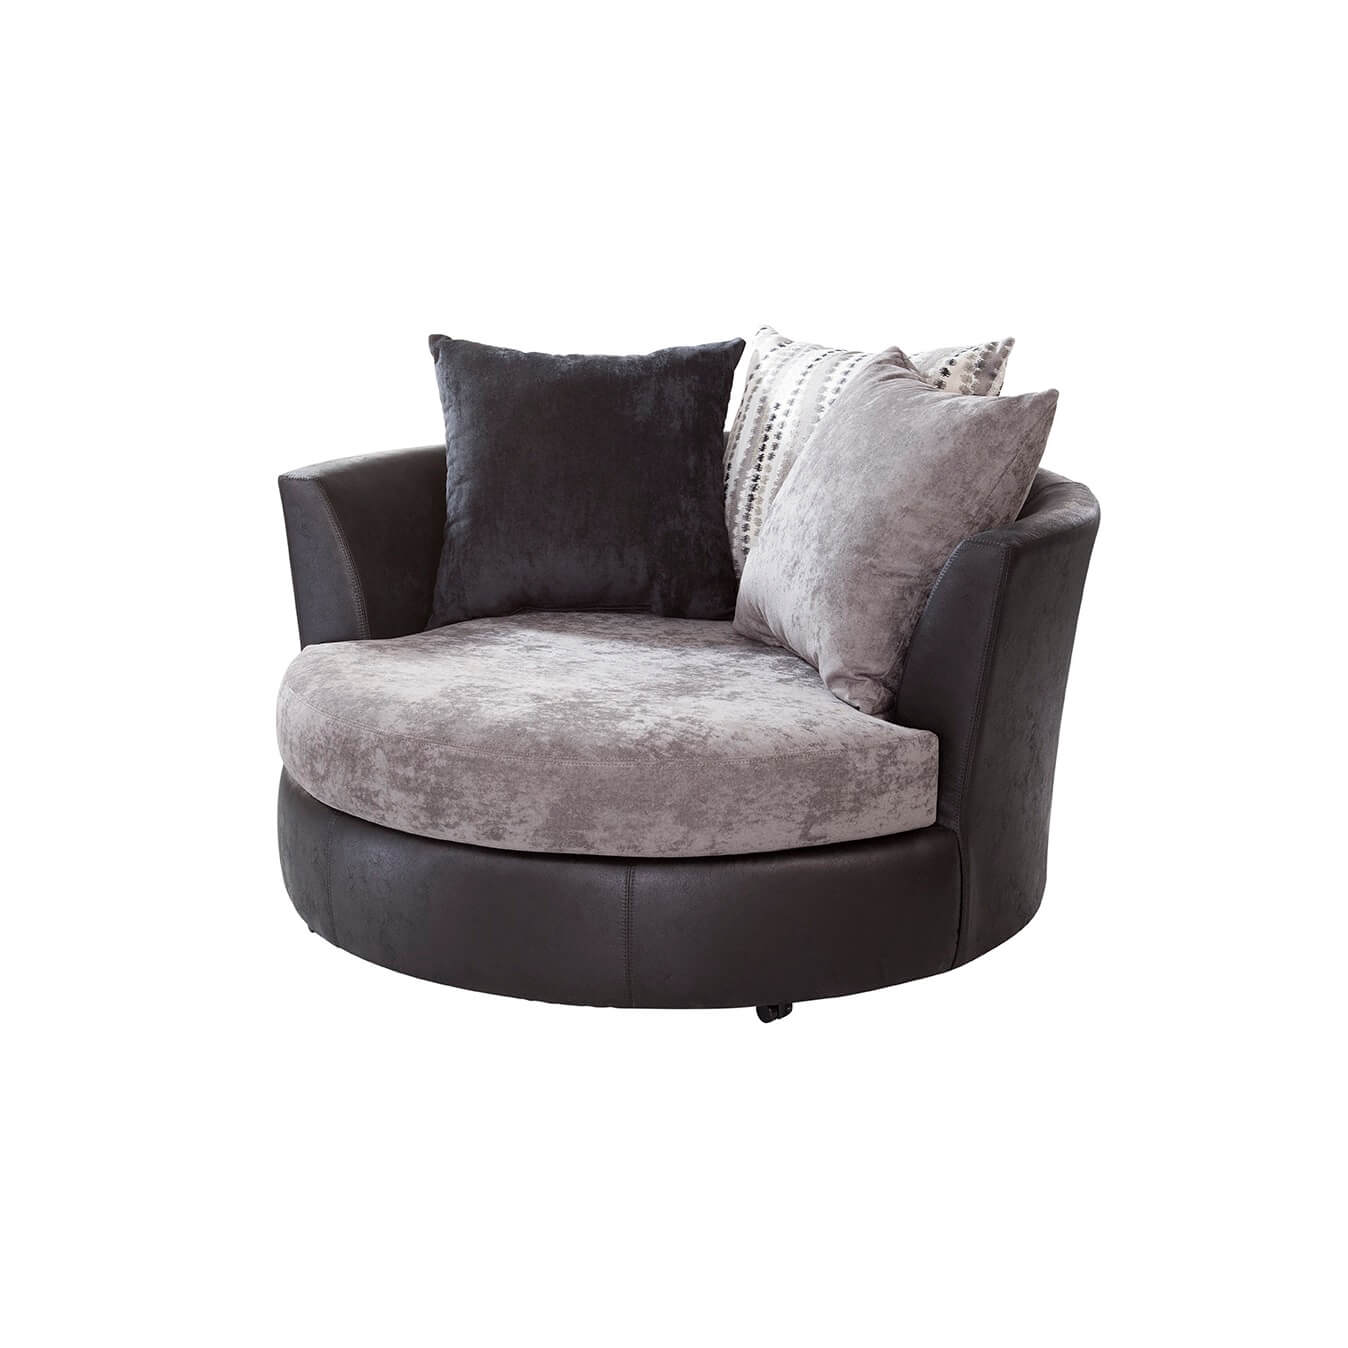 Rent To Own Woodhaven Jamal Swivel Barrel Chair At Aaron S Today